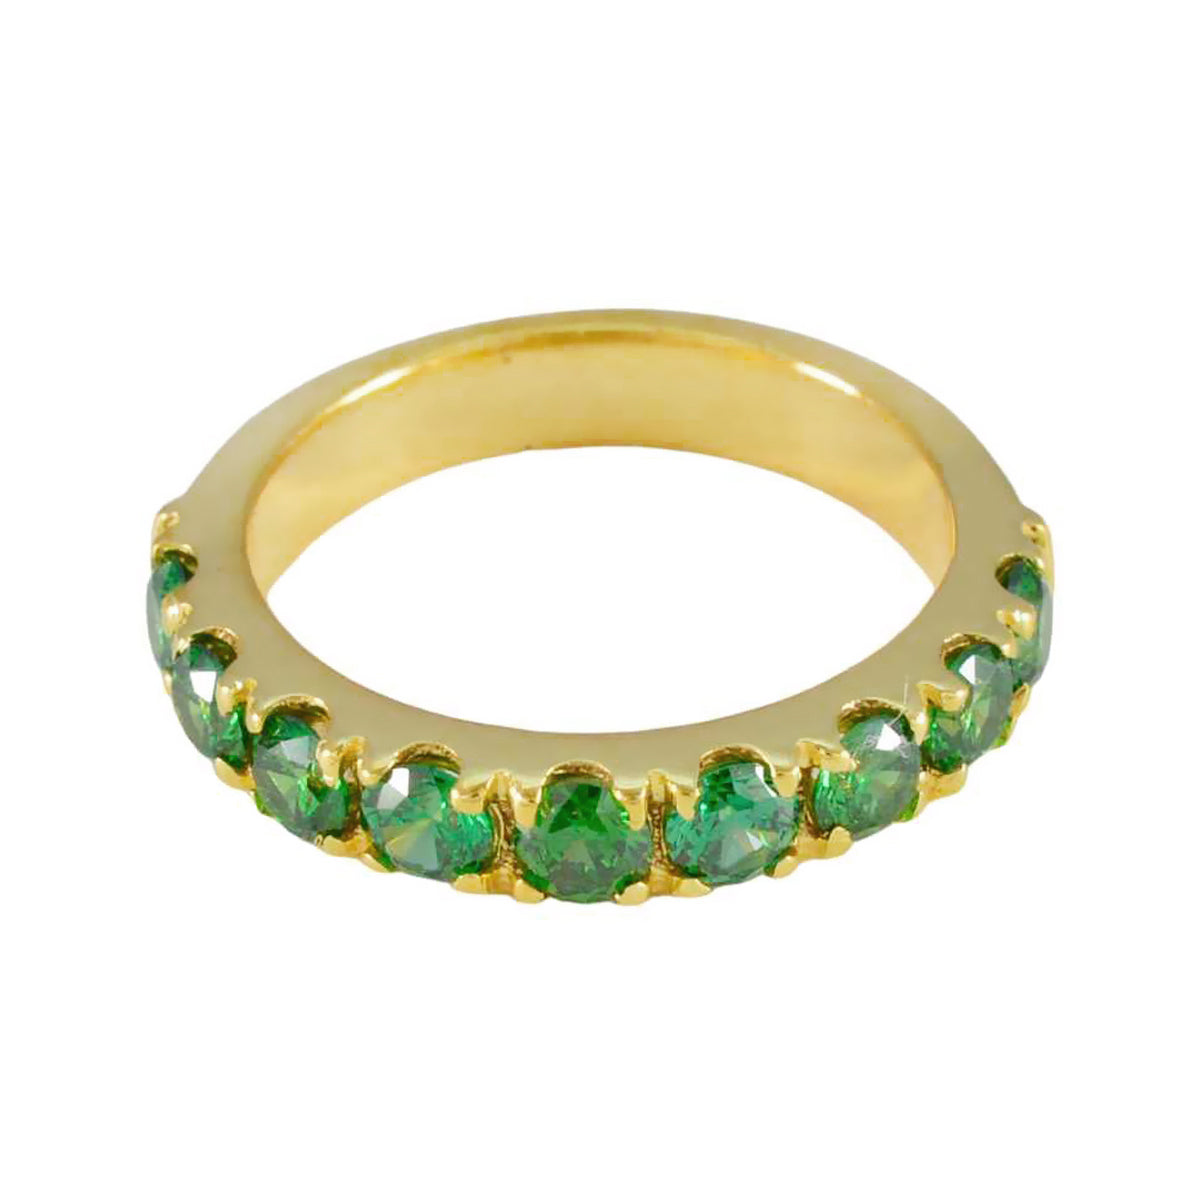 Riyo Charming Silver Ring With Yellow Gold Plating Emerald CZ Stone Round Shape Prong Setting Fashion Jewelry Cocktail Ring